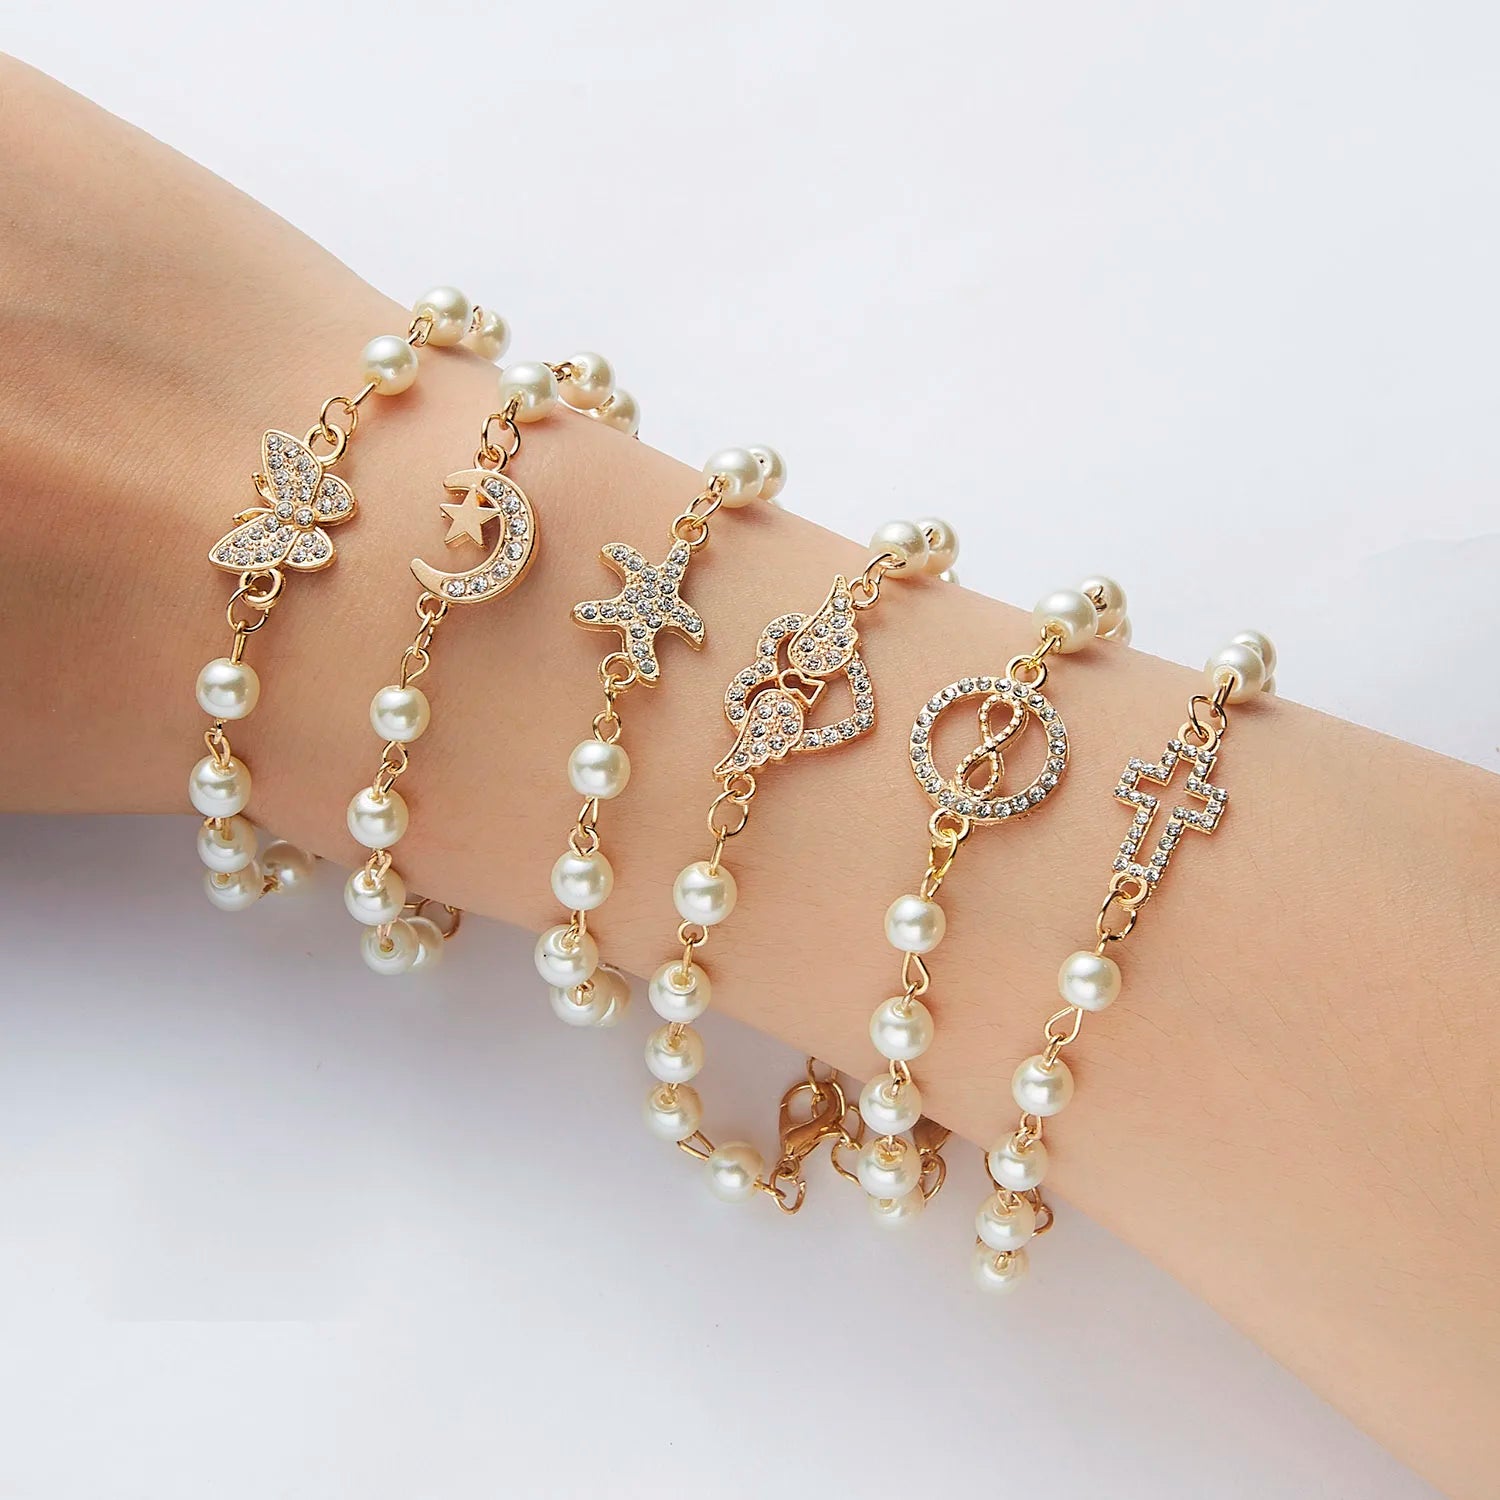 Hot Trendy Cross Infinity Butterfly Starfish Love Wing Rhinestone Pearl Adjustable Bracelet for Women and Girls